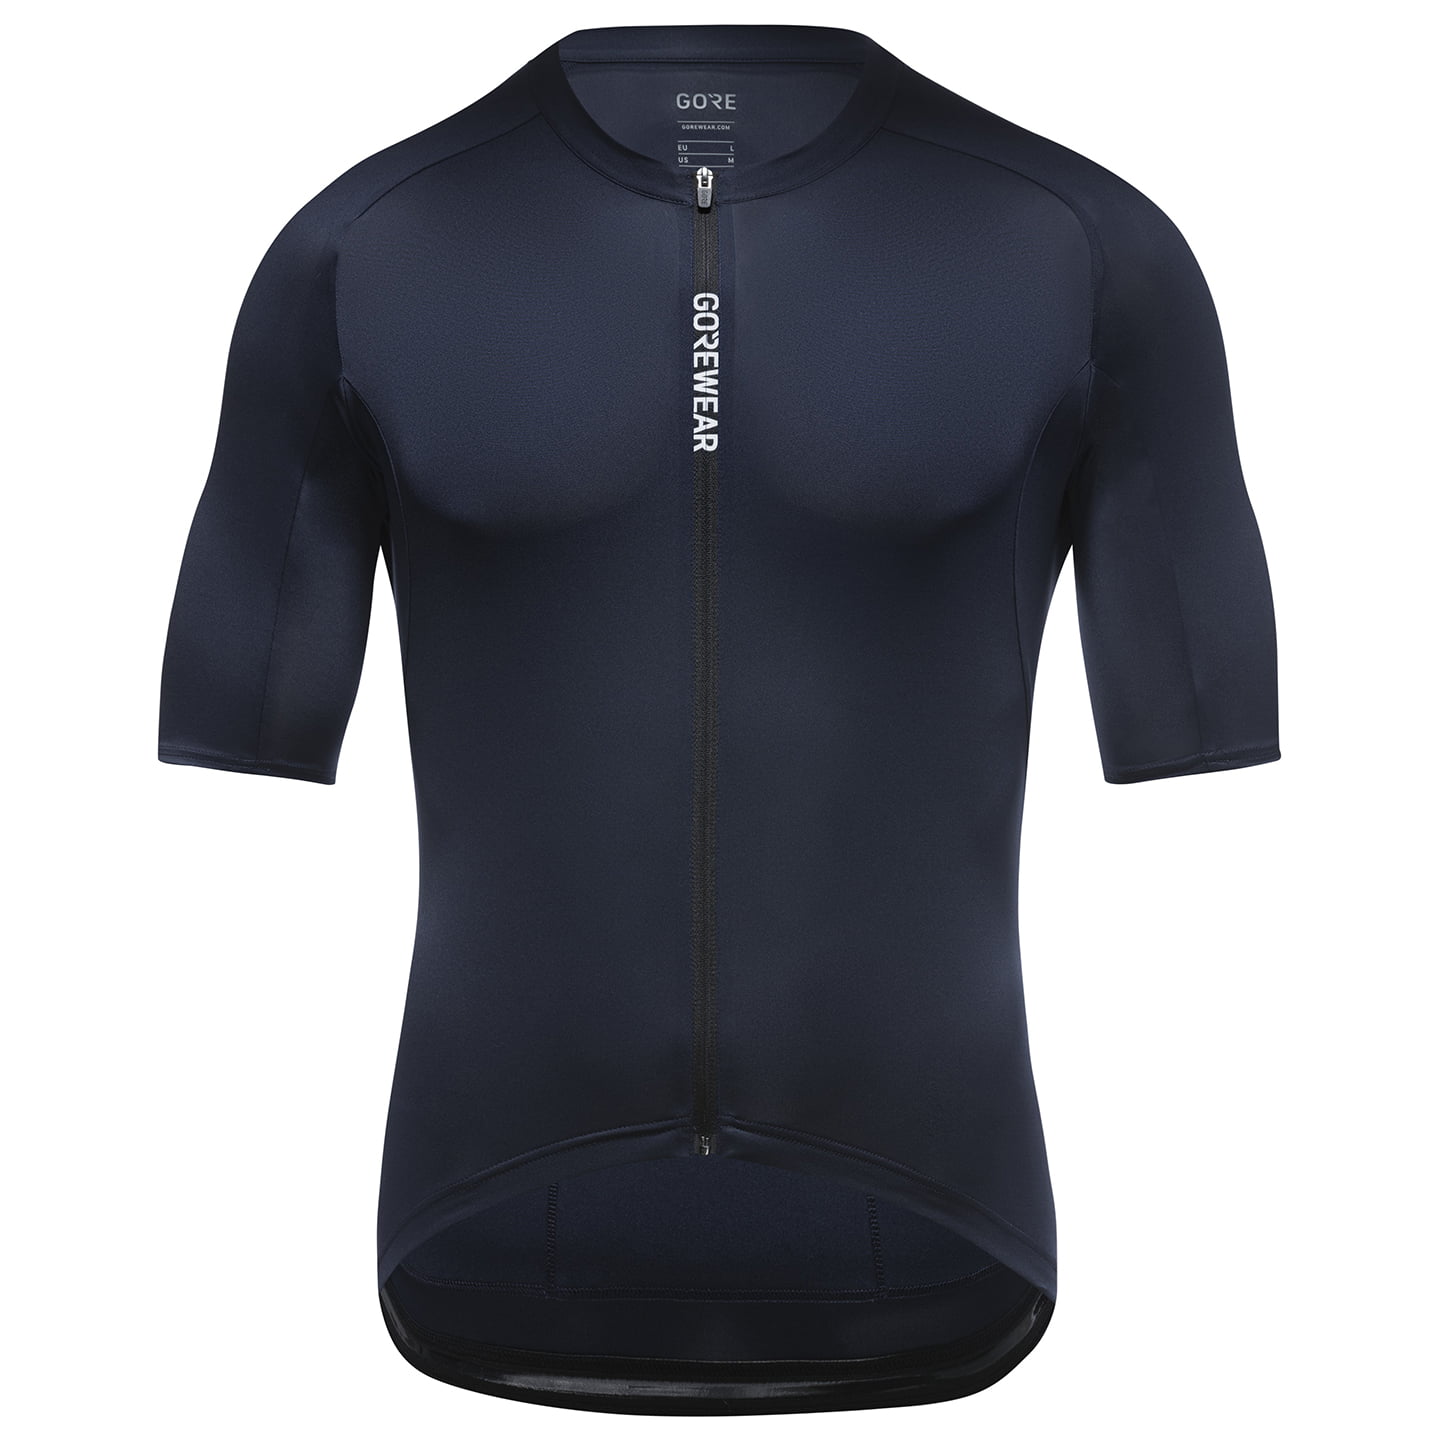 Spinshift Short Sleeve Jersey Short Sleeve Jersey, for men, size 2XL, Cycling jersey, Cycle clothing